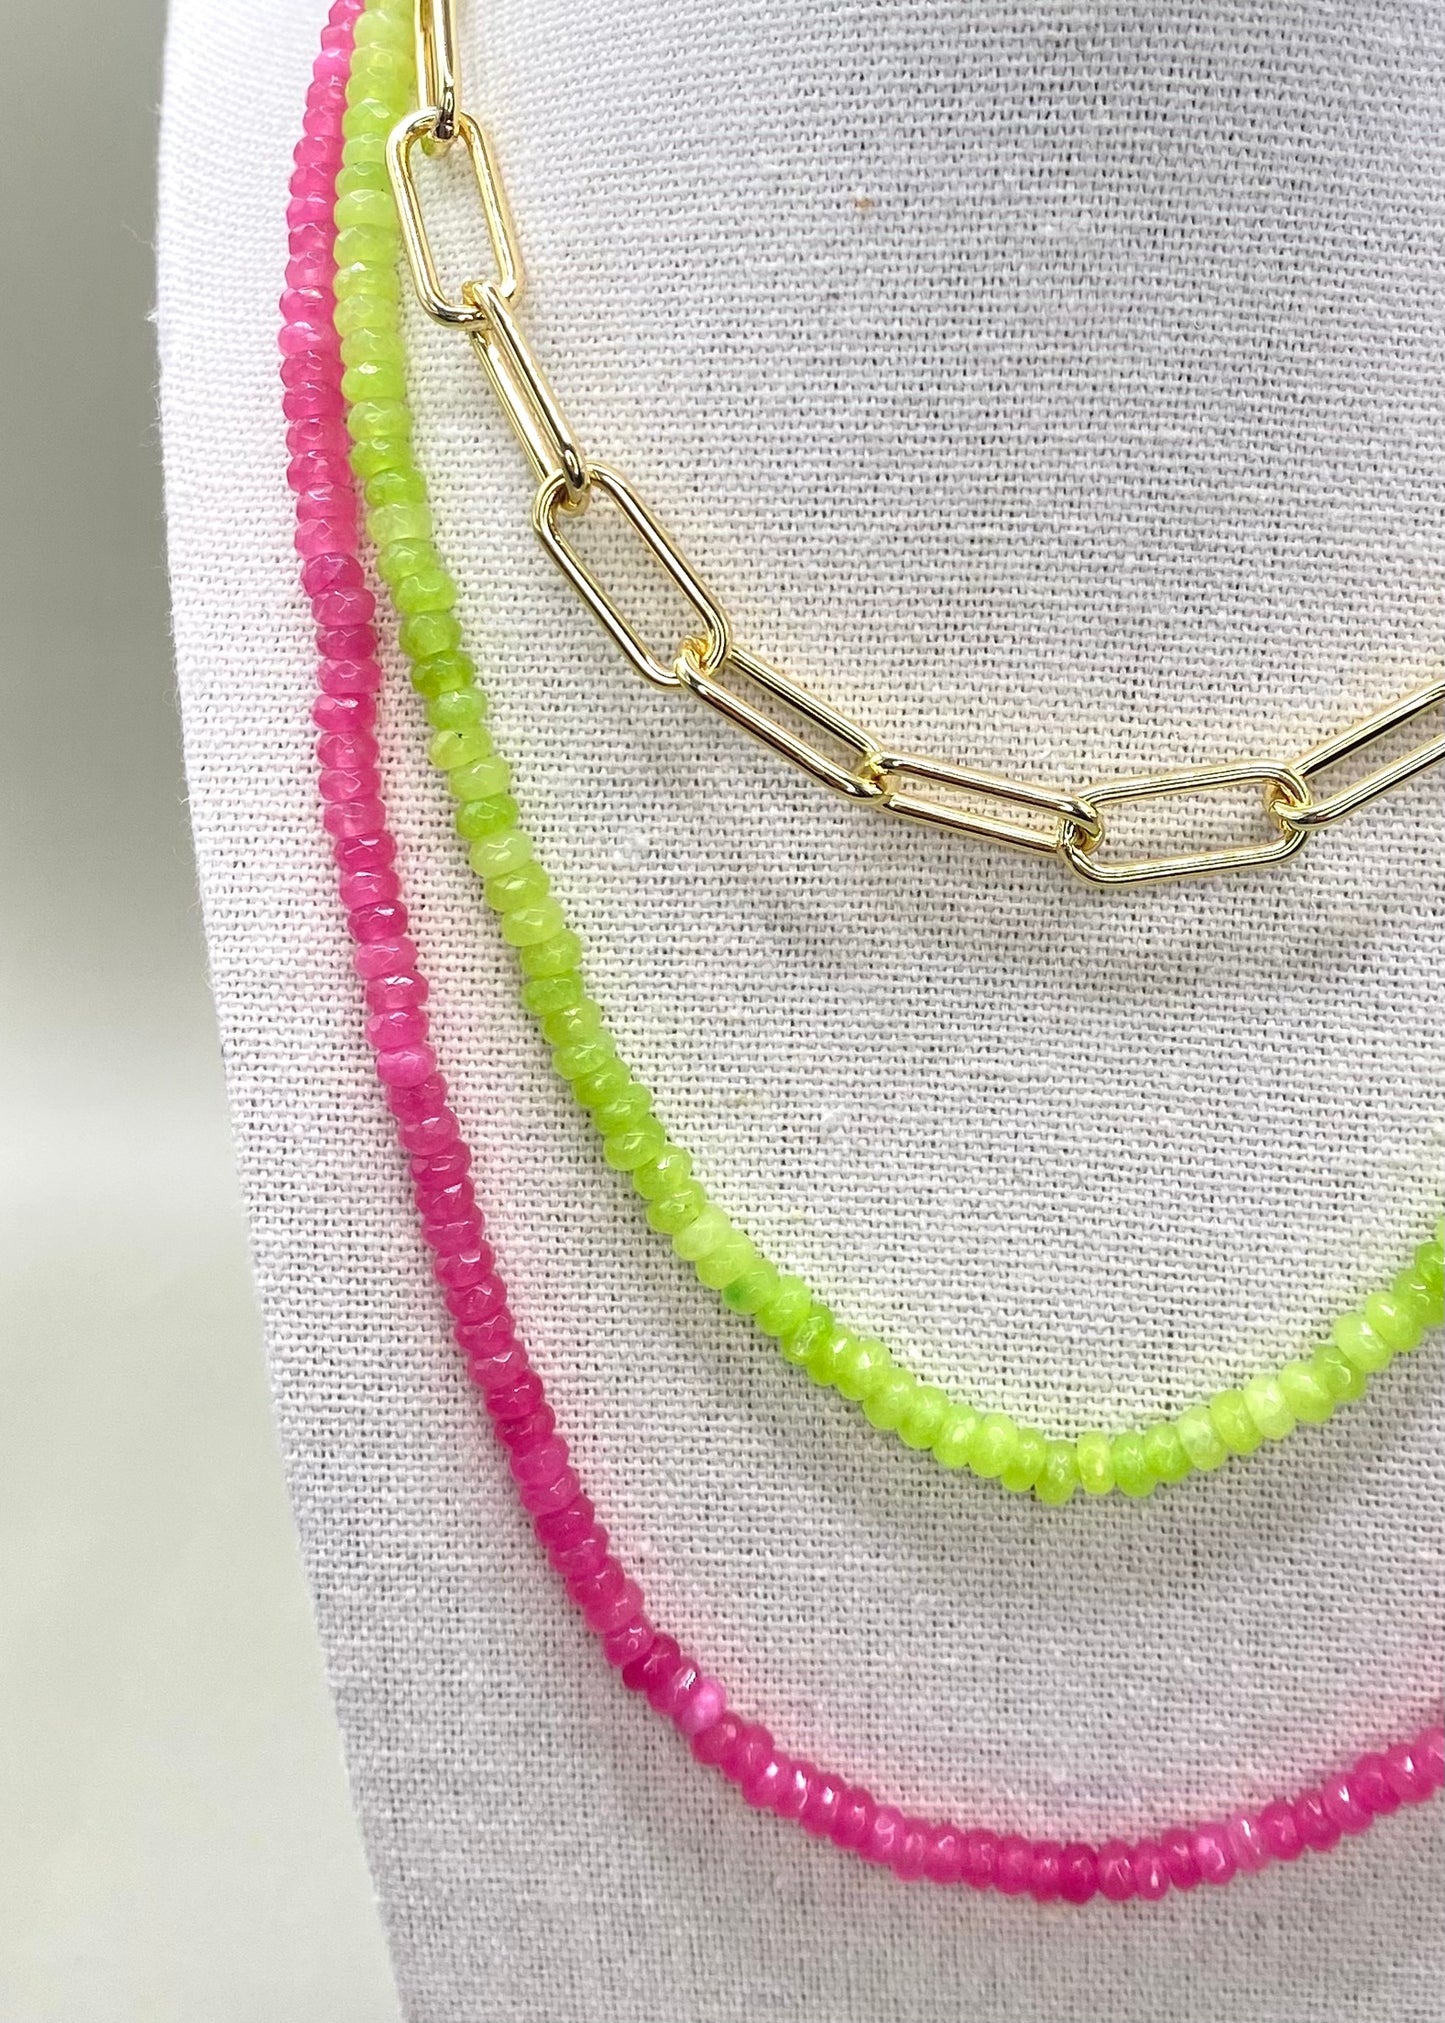 Small Beaded Necklace - Lime